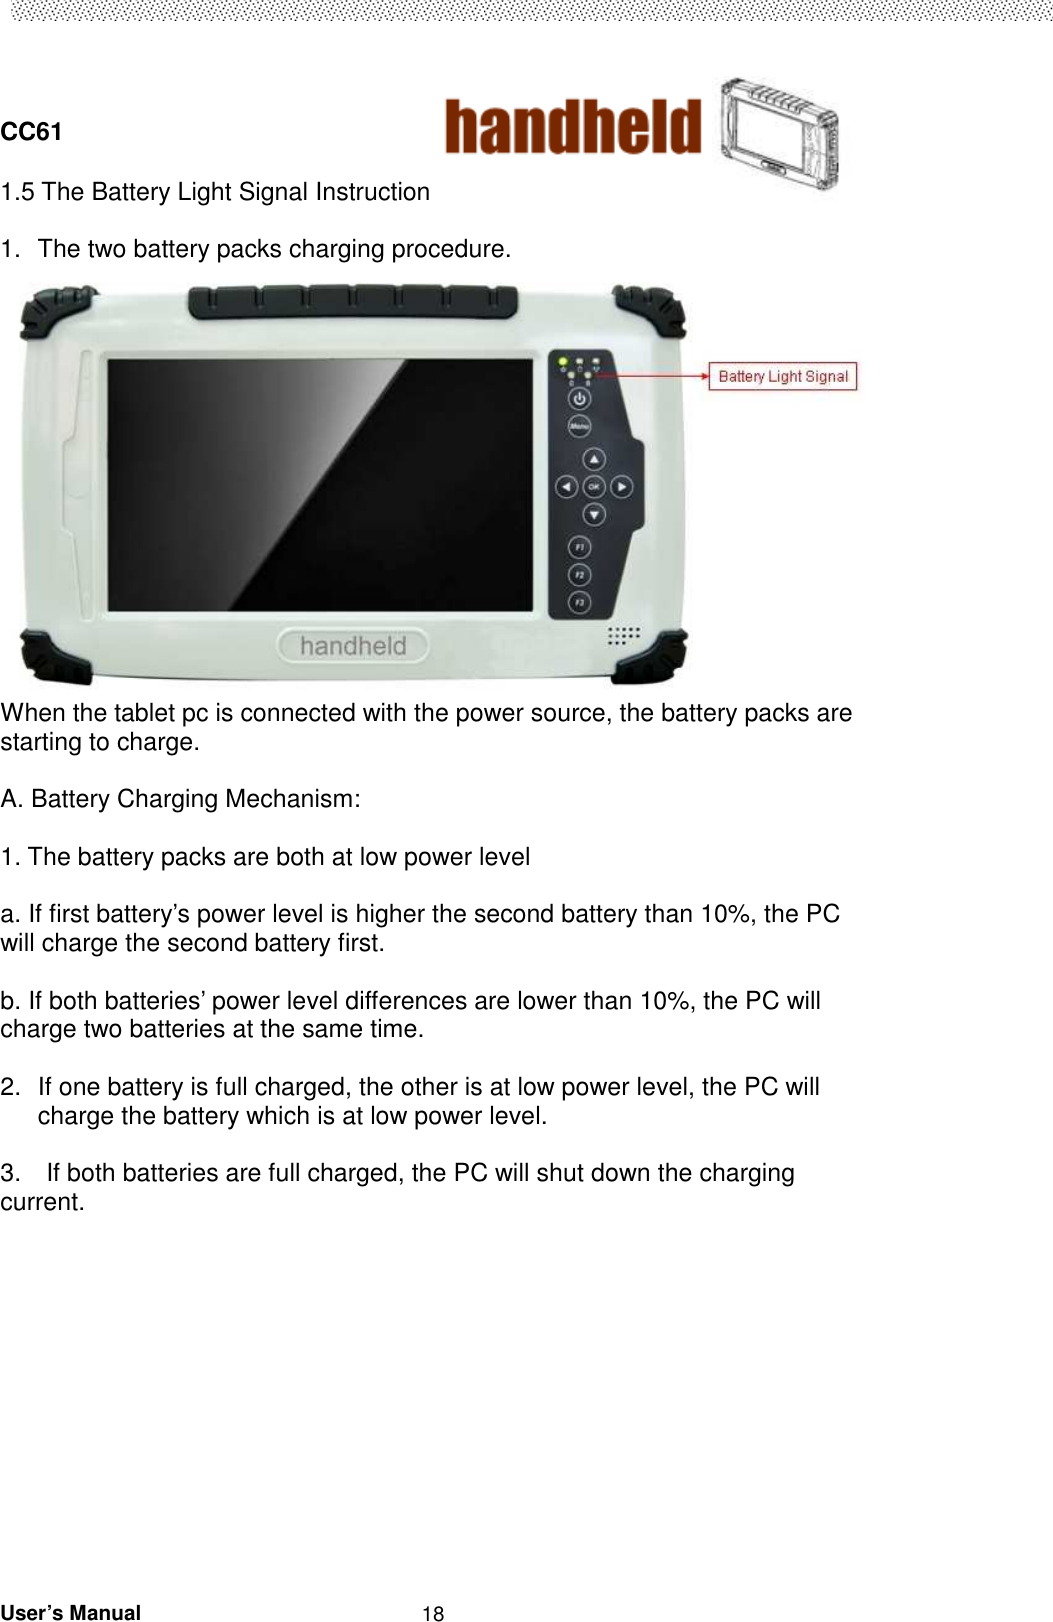  CC61                                       User’s Manual                                                   181.5 The Battery Light Signal Instruction    1.  The two battery packs charging procedure.  When the tablet pc is connected with the power source, the battery packs are starting to charge.    A. Battery Charging Mechanism:  1. The battery packs are both at low power level  a. If first battery’s power level is higher the second battery than 10%, the PC will charge the second battery first.    b. If both batteries’ power level differences are lower than 10%, the PC will charge two batteries at the same time.    2.  If one battery is full charged, the other is at low power level, the PC will charge the battery which is at low power level.        3.    If both batteries are full charged, the PC will shut down the charging current.                